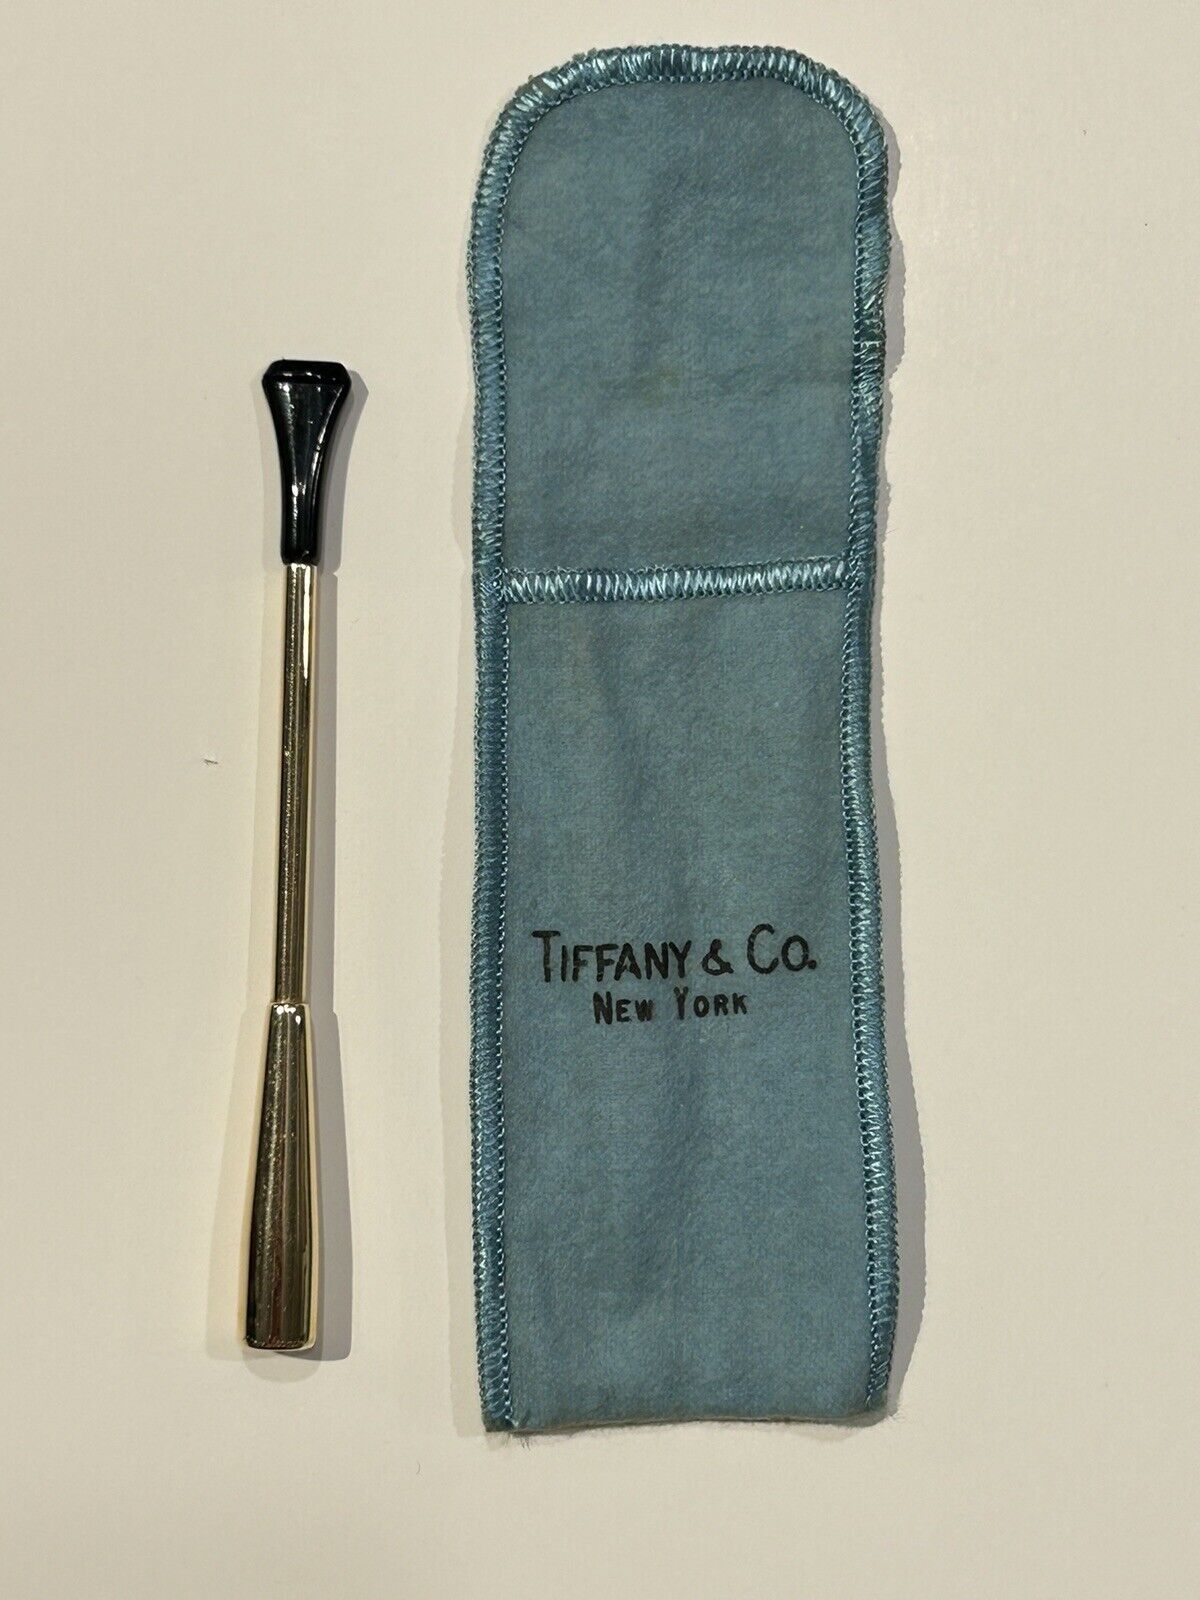 Tiffany & Co 14kt Yellow gold cigarette holder